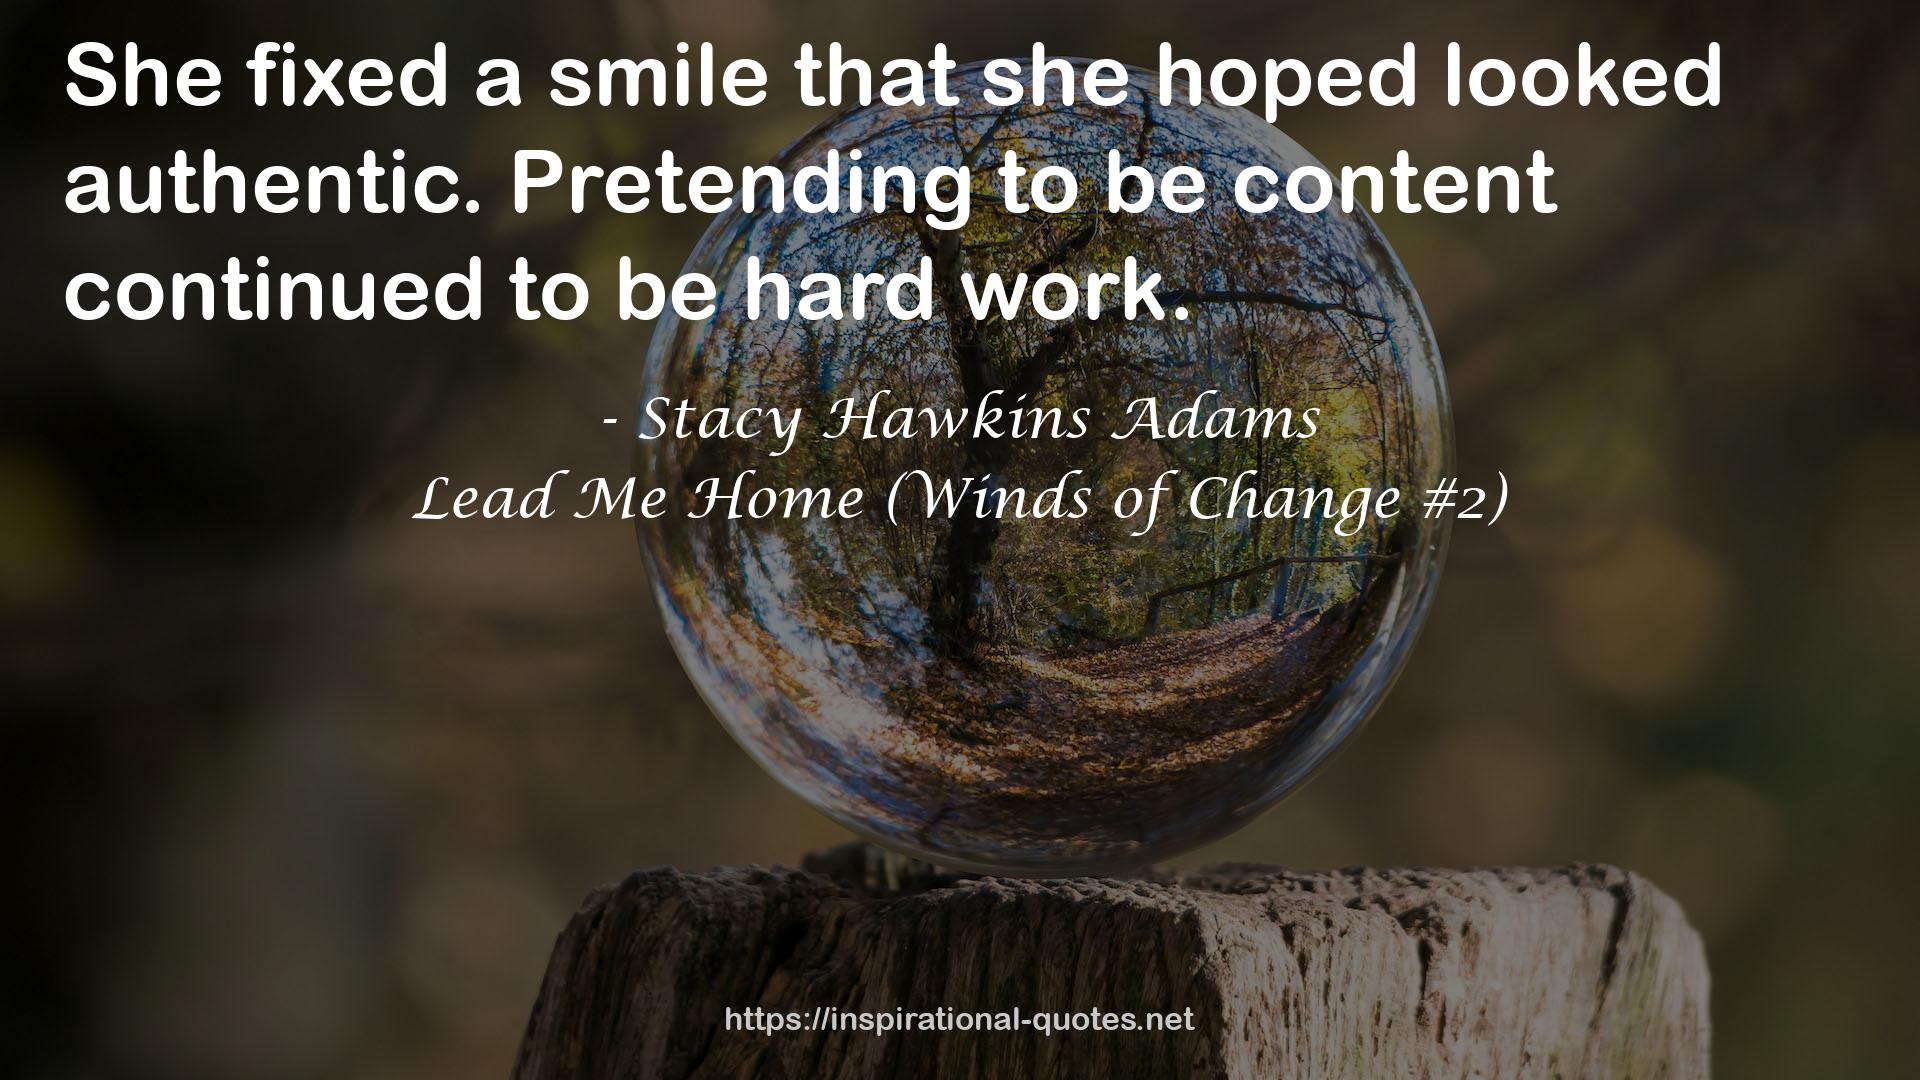 Lead Me Home (Winds of Change #2) QUOTES